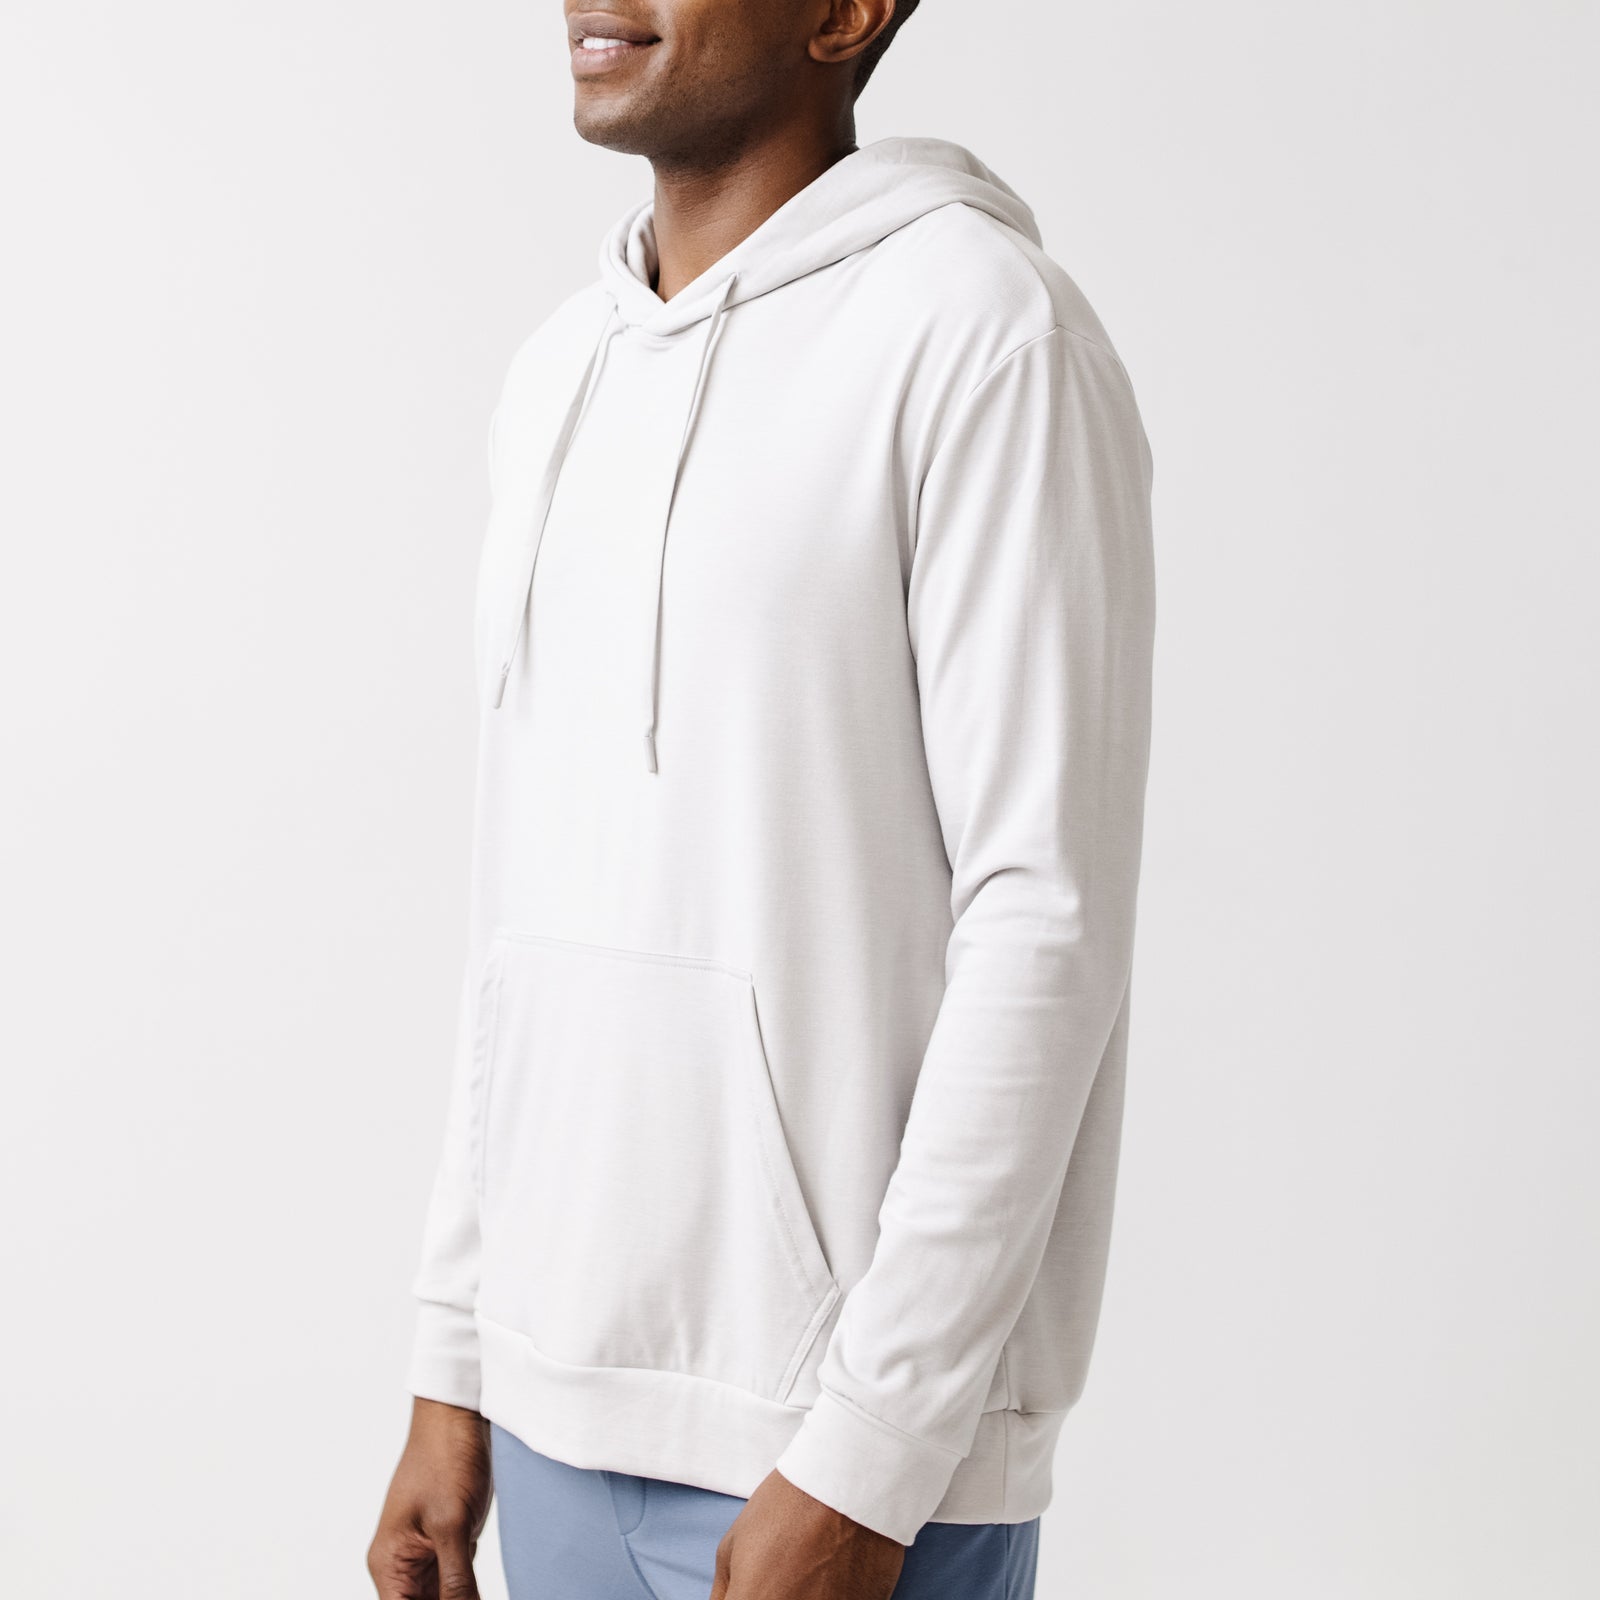 Light Grey Bamboo Hoodie worn by a man standing in front of white background.